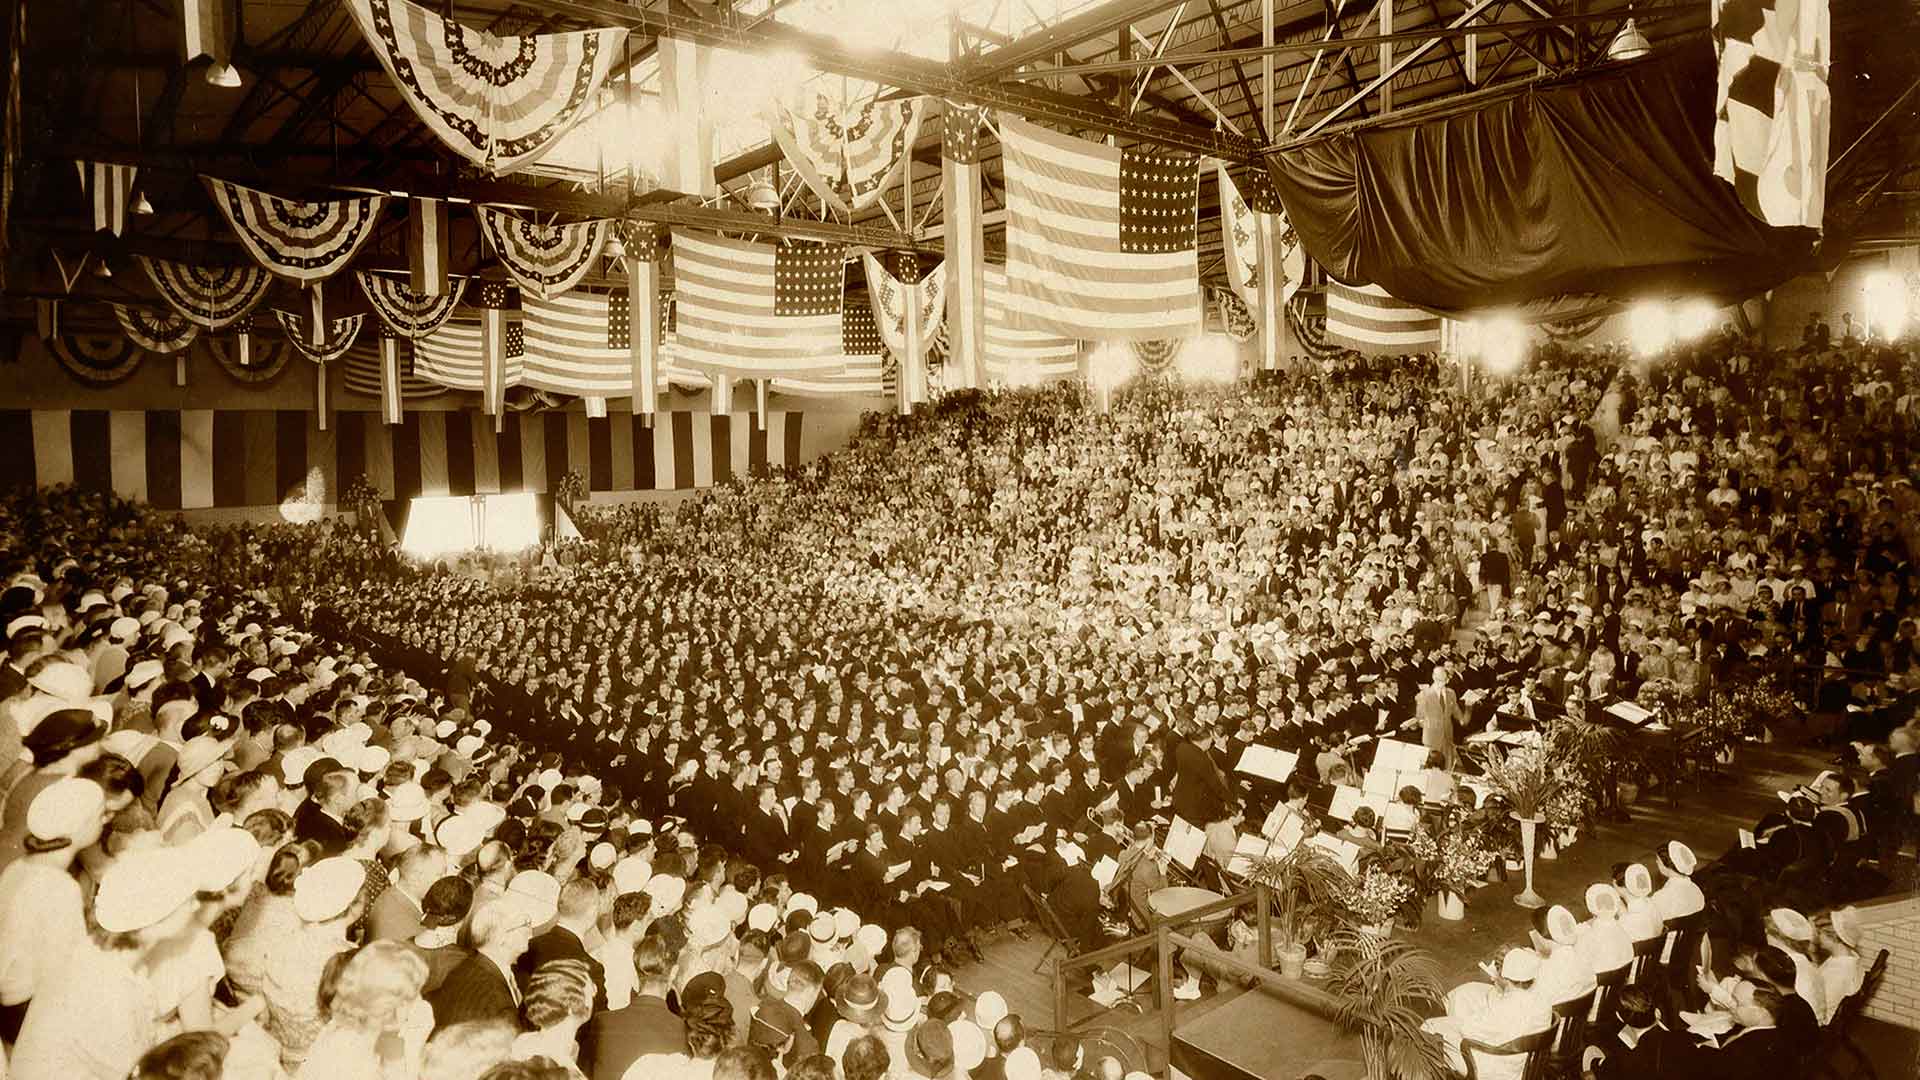 Commencement in Ritchie Coliseum in 1933